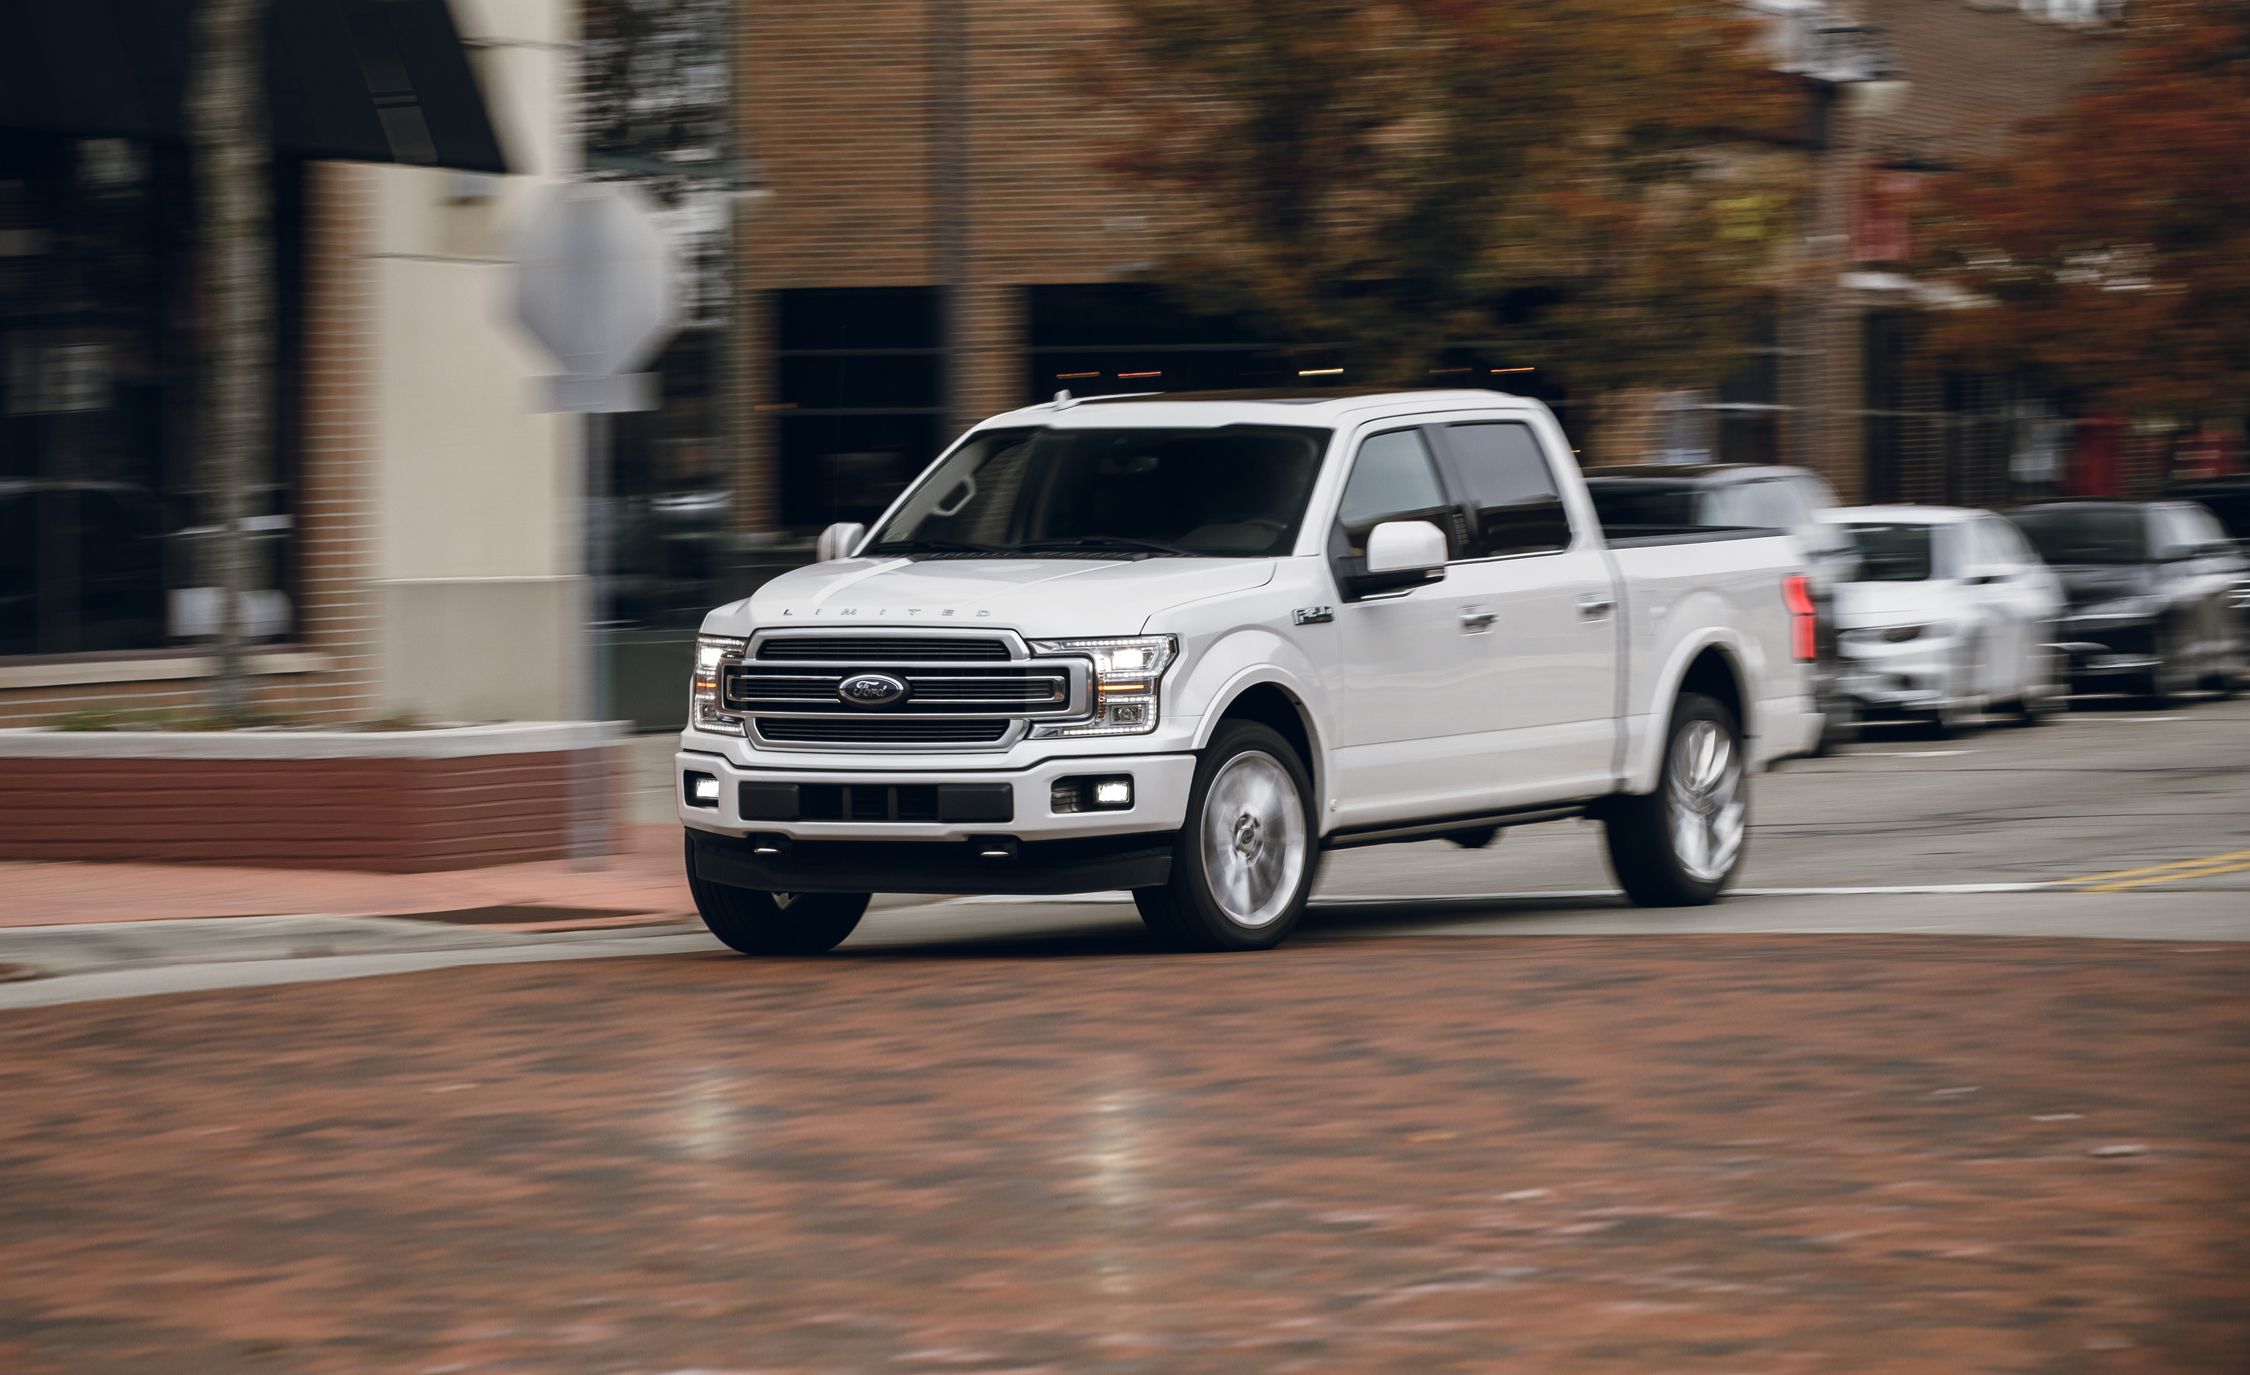 19 Ford F 150 Limited Offers Better Than Raptor Performance